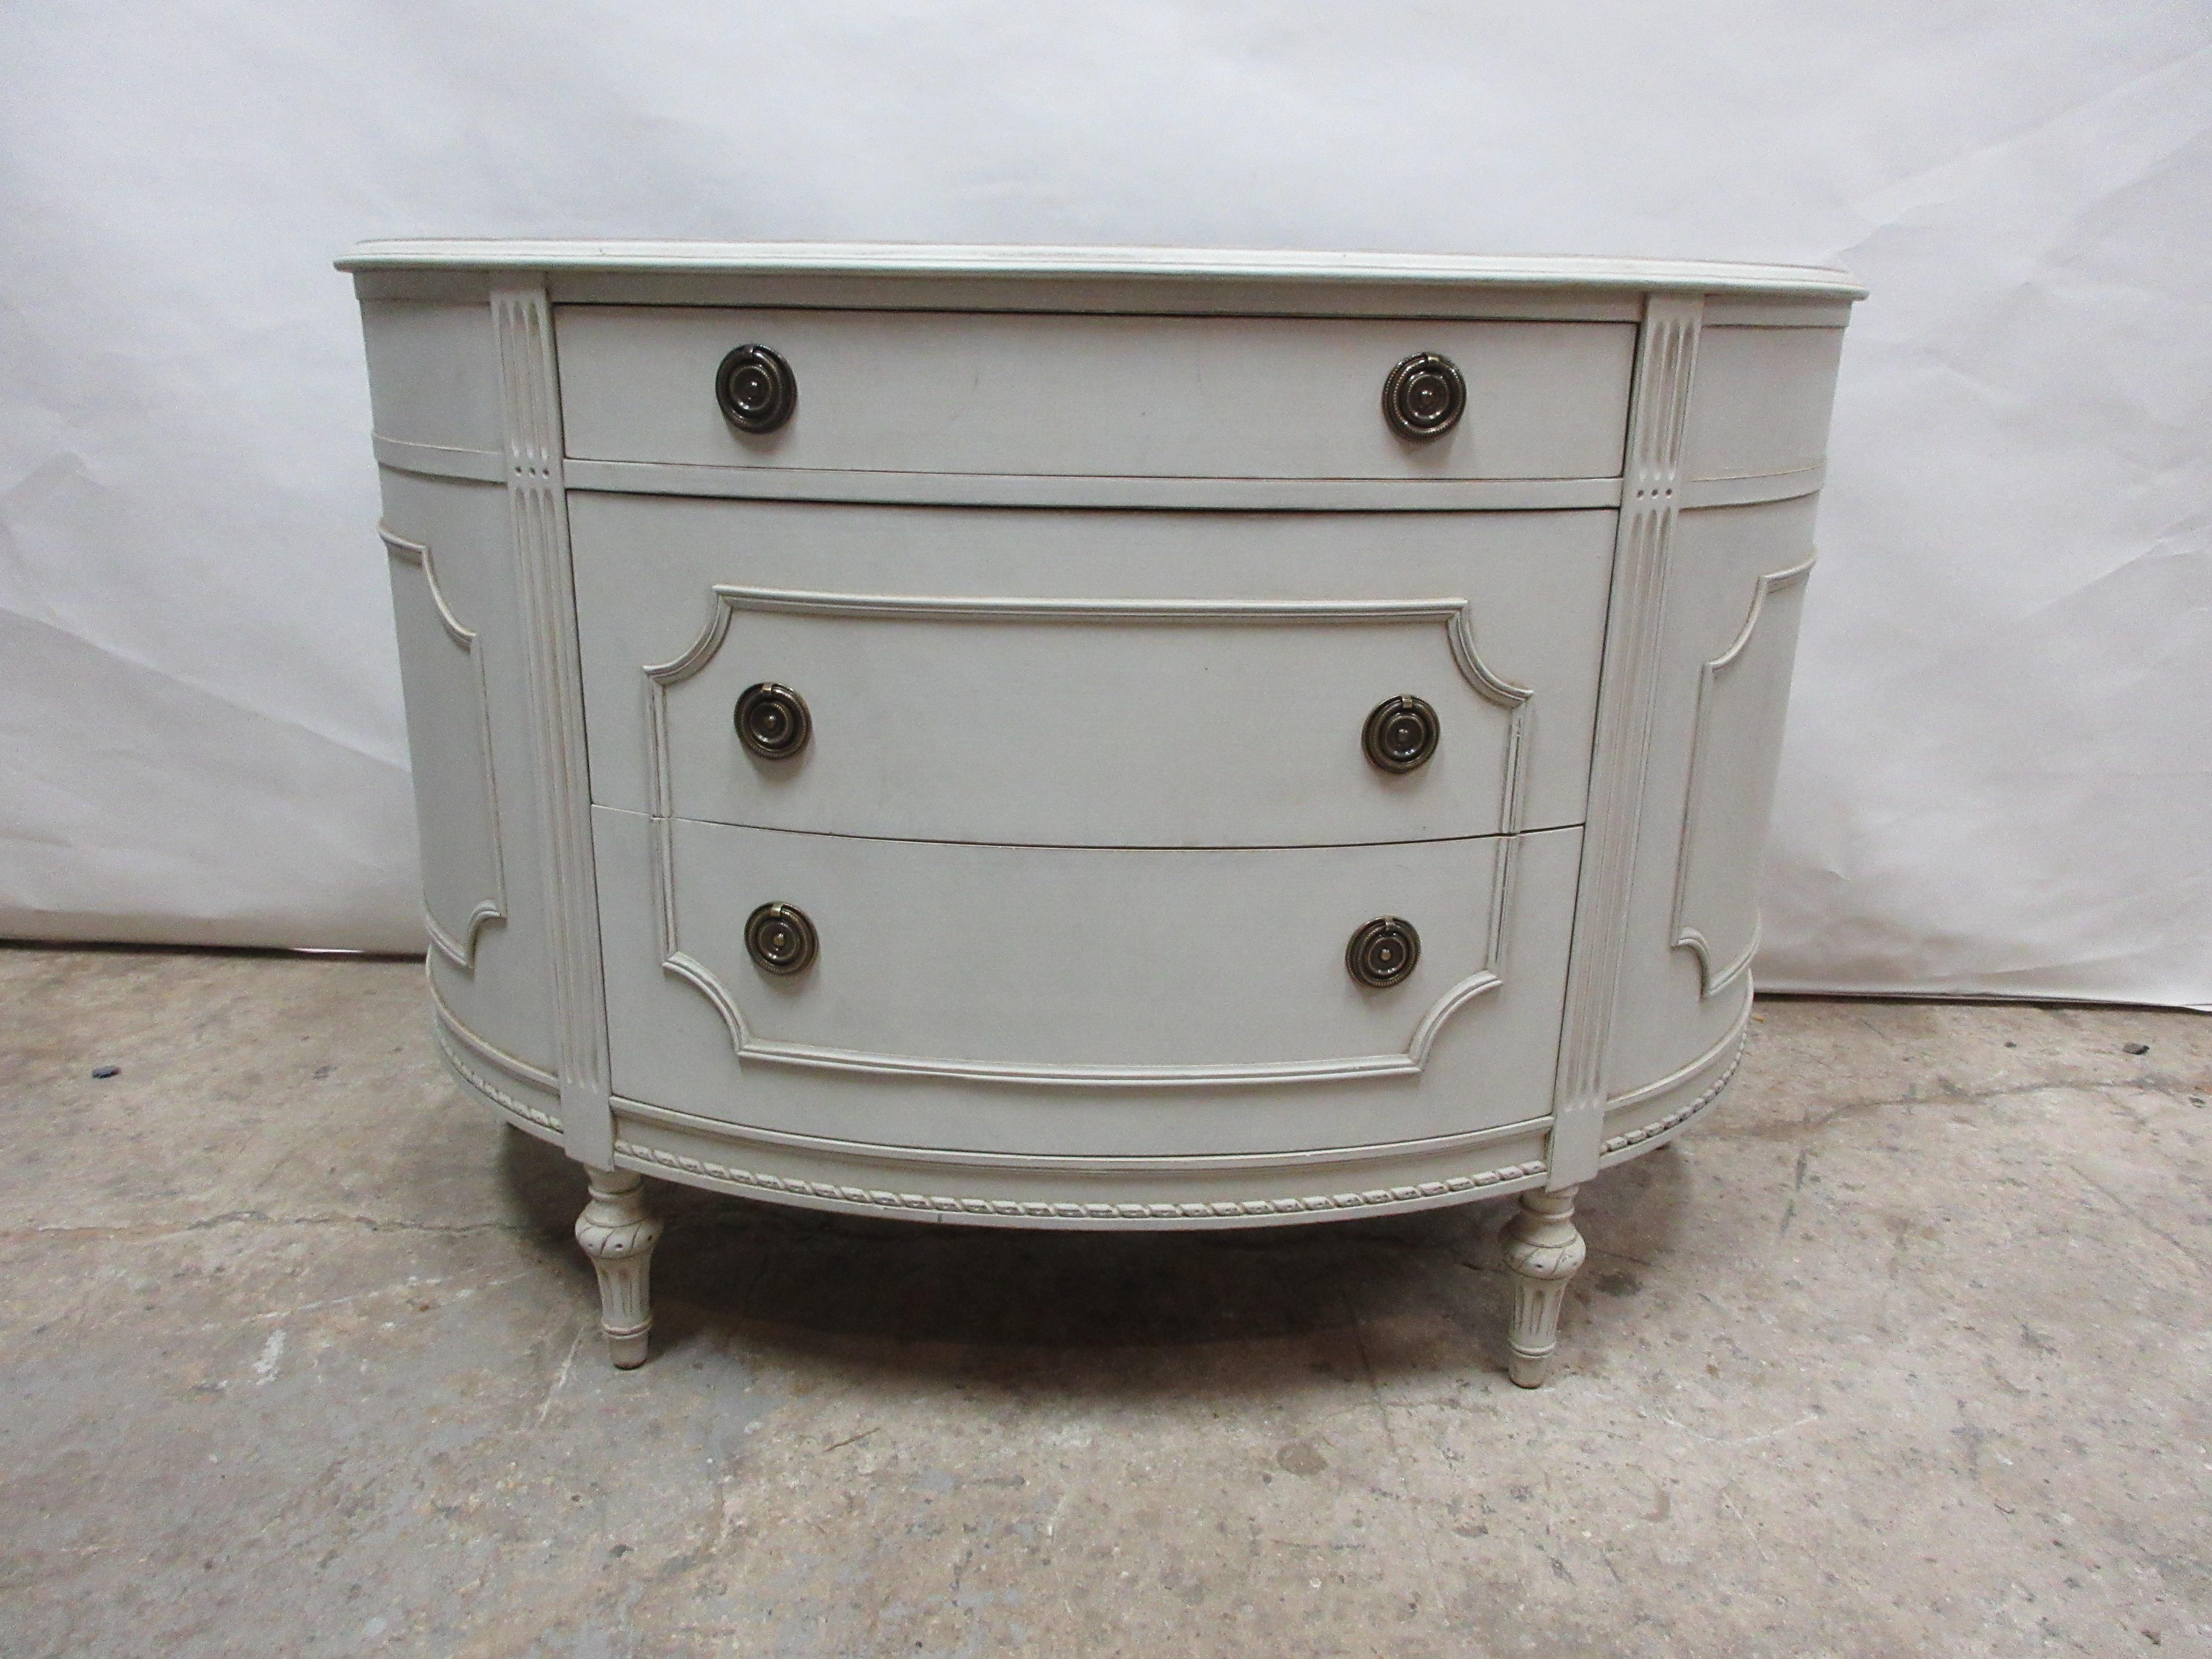 This is a unique Gustavian barrel front chest. It has been fully restored and repainted with milk paints, 